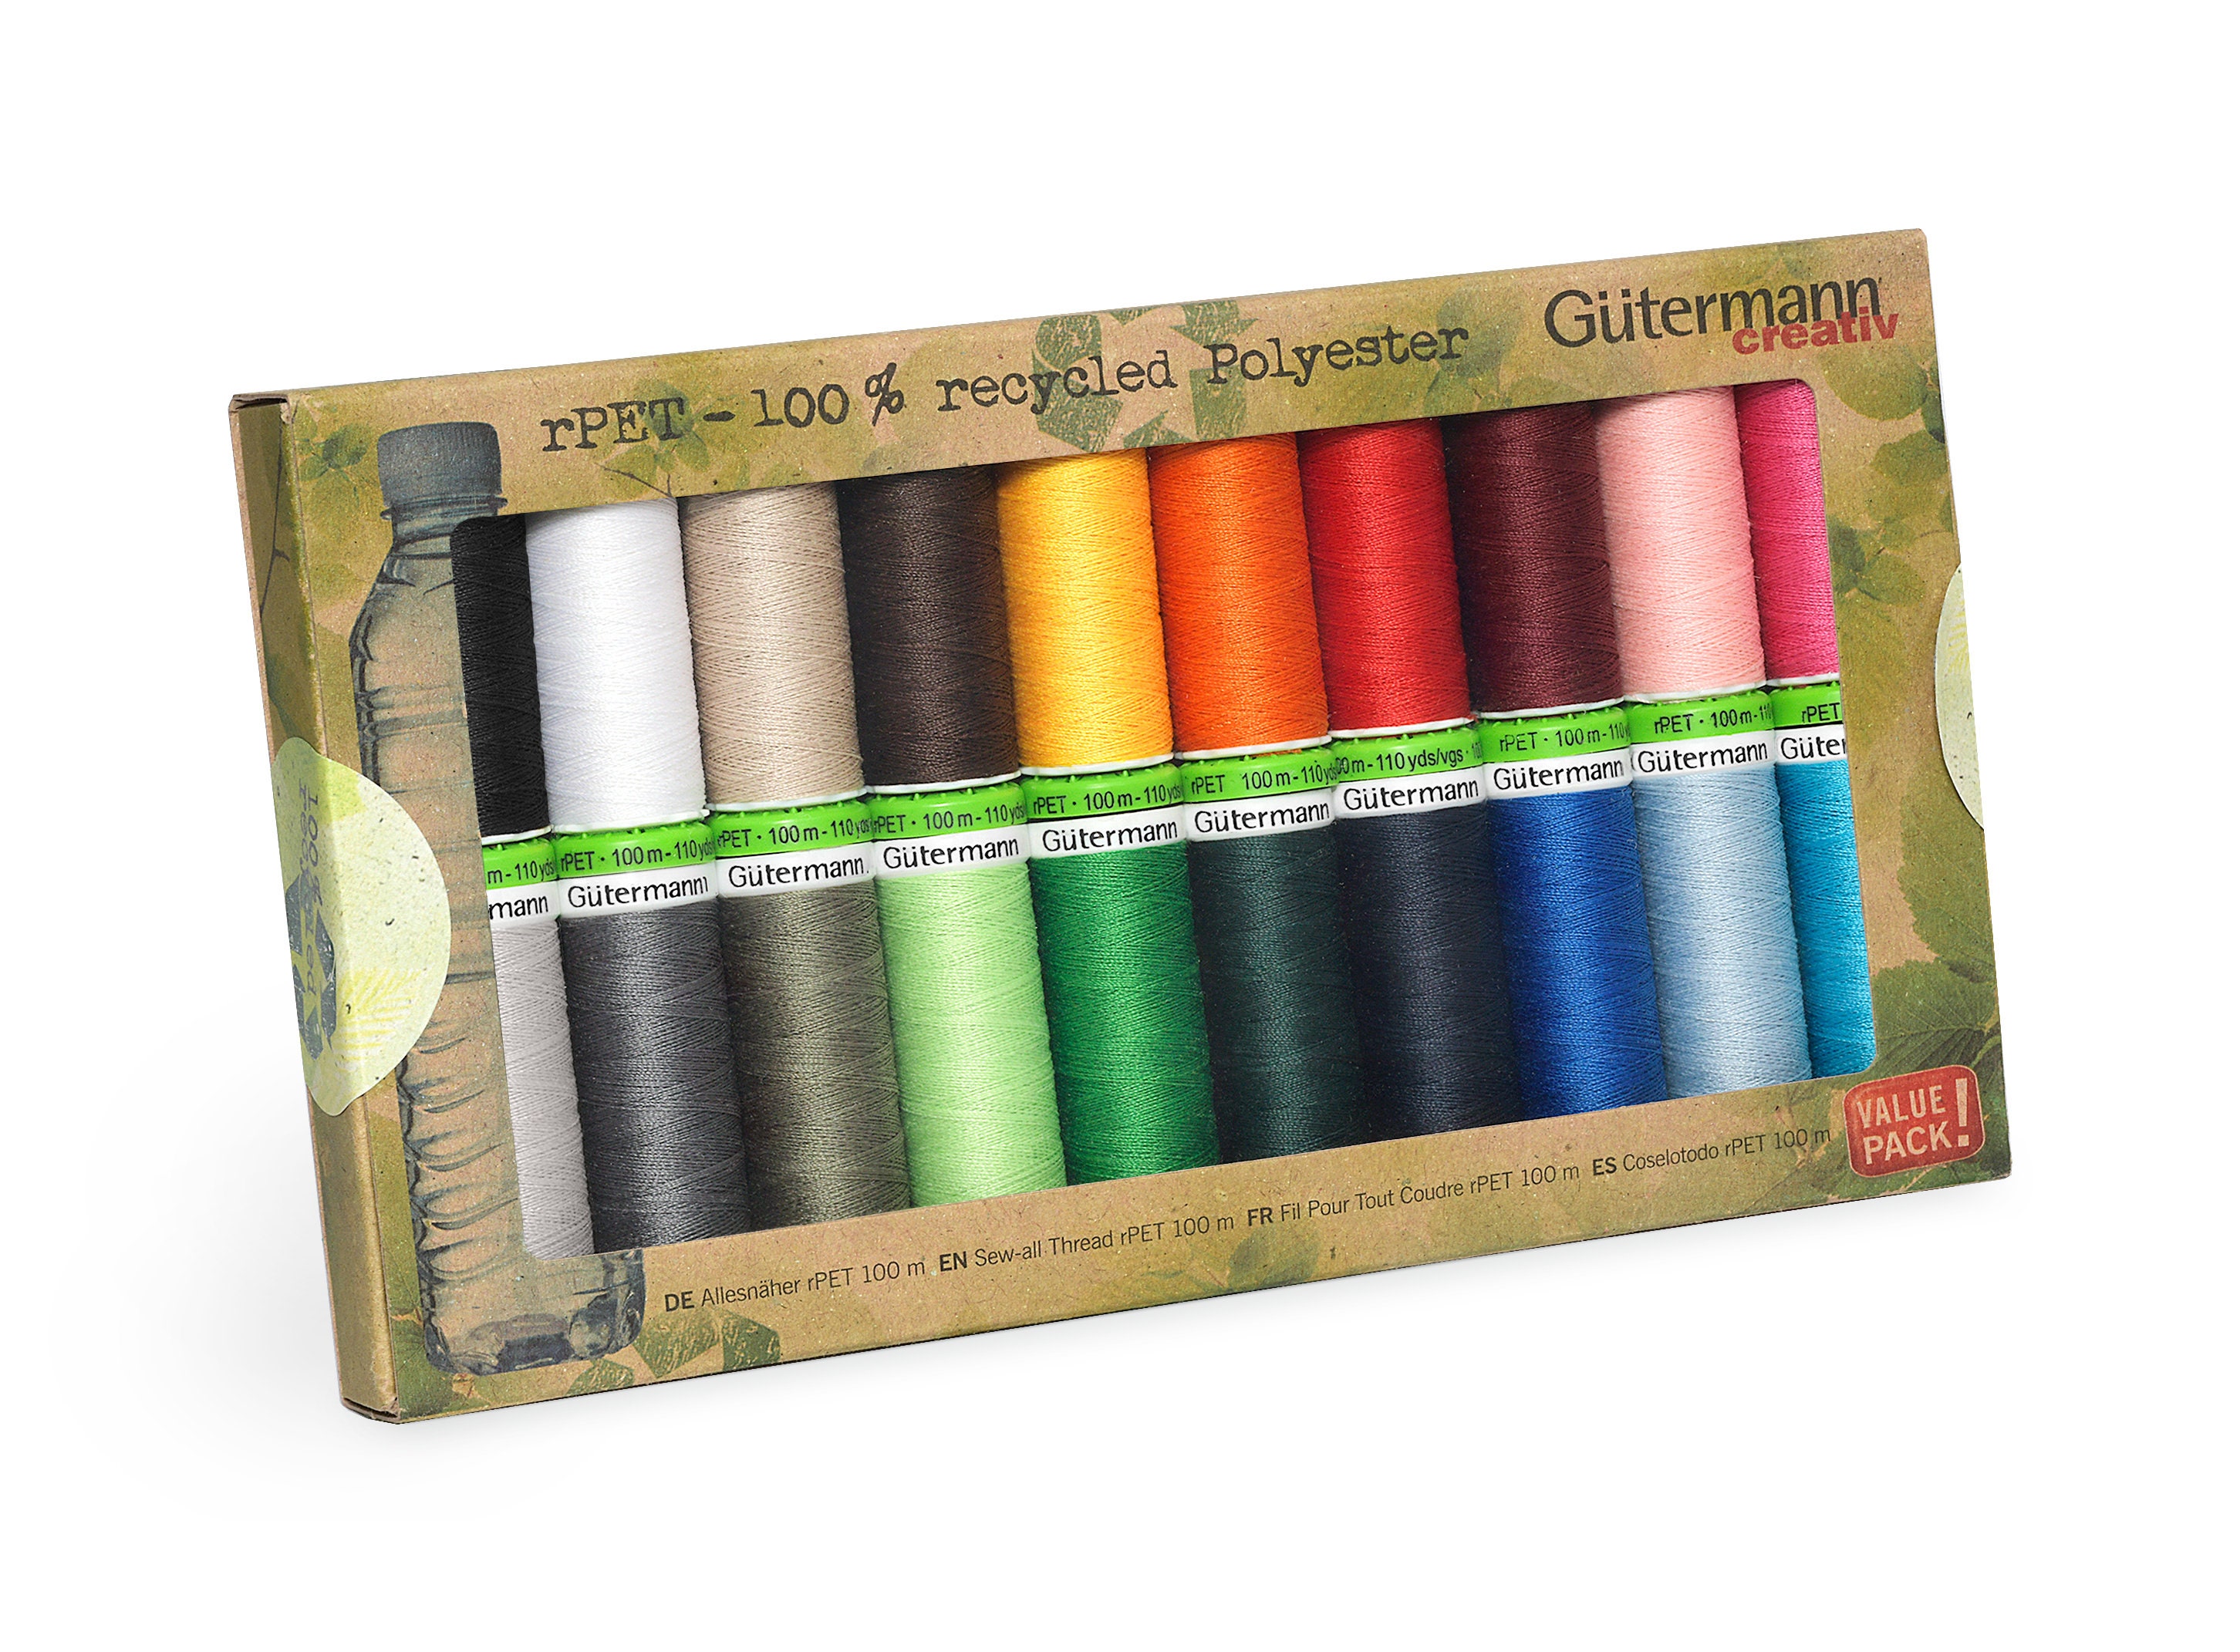 Gutermann Multicolor 100% Polyester Sewing Thread, 110 yd (26 Pieces) 